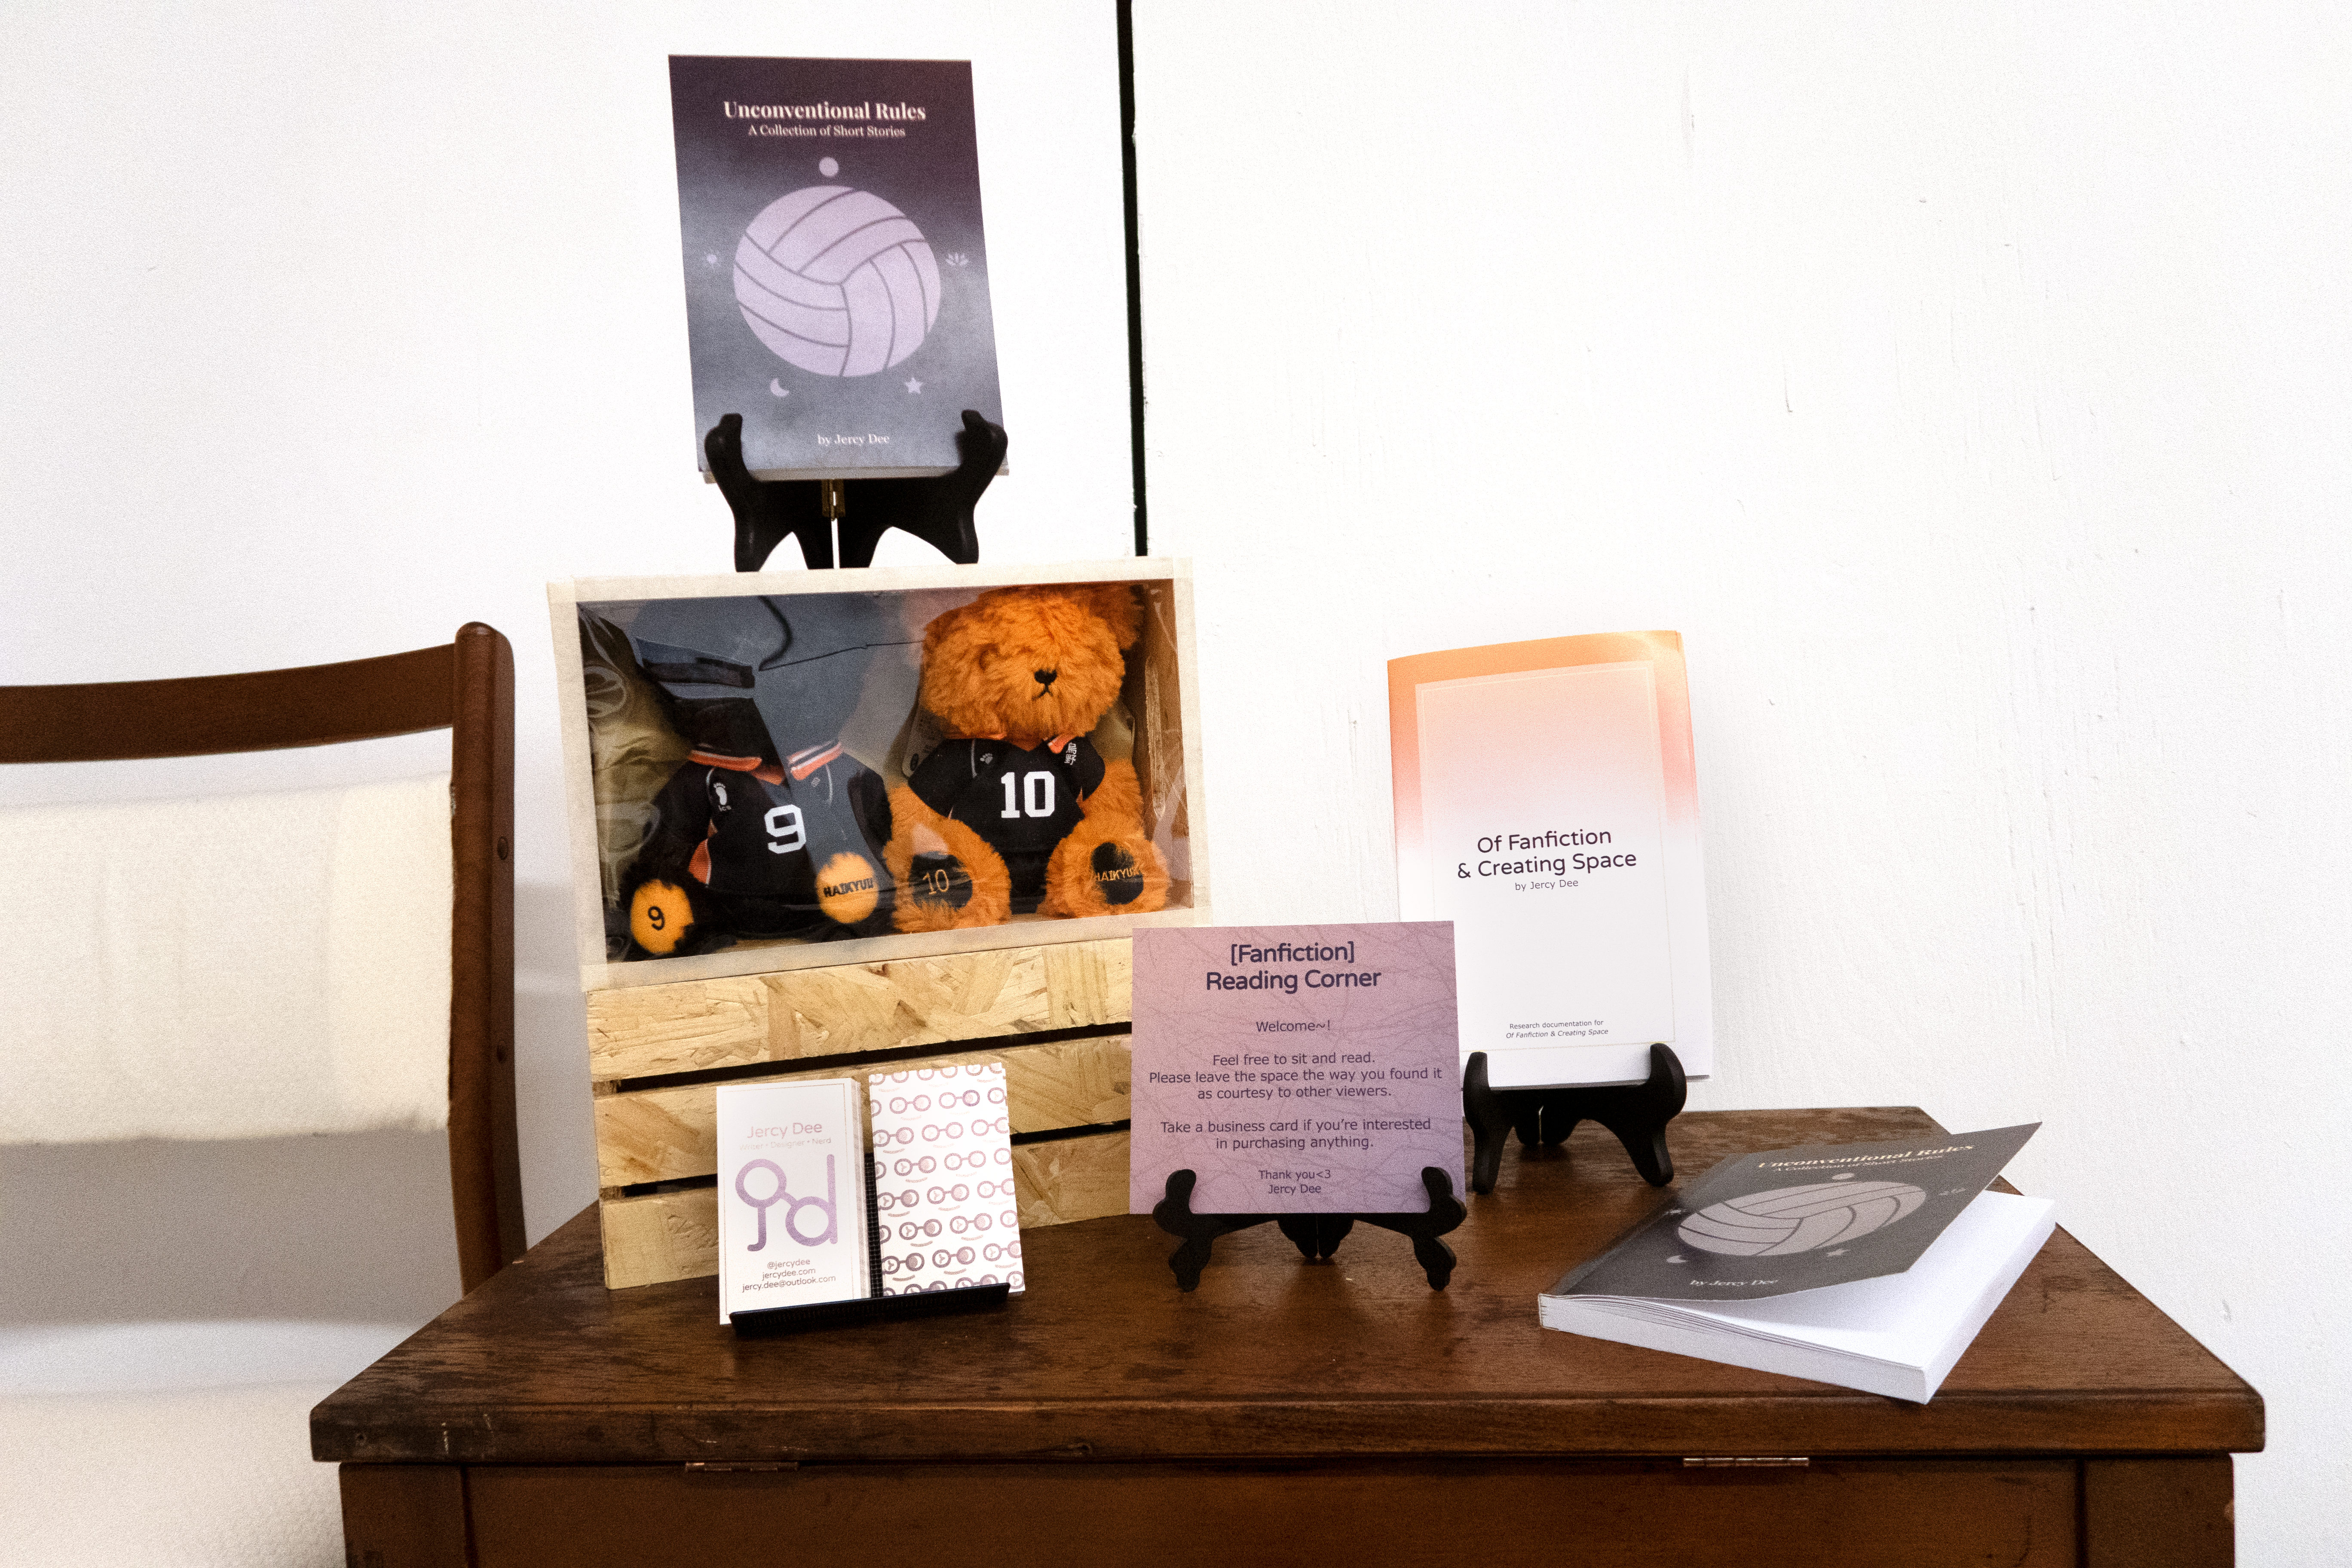 A close-up shot of the reading space, specifically of the contents on the table. From left to right: decorative boxes with one copy of Unconventional Rules standing on top, a printed copy of OFACS primary research documentation standing next to the boxes, and the other copy of Unconventional Rules lying next to it. Also on the table are business cards and a welcome sign for the viewers.